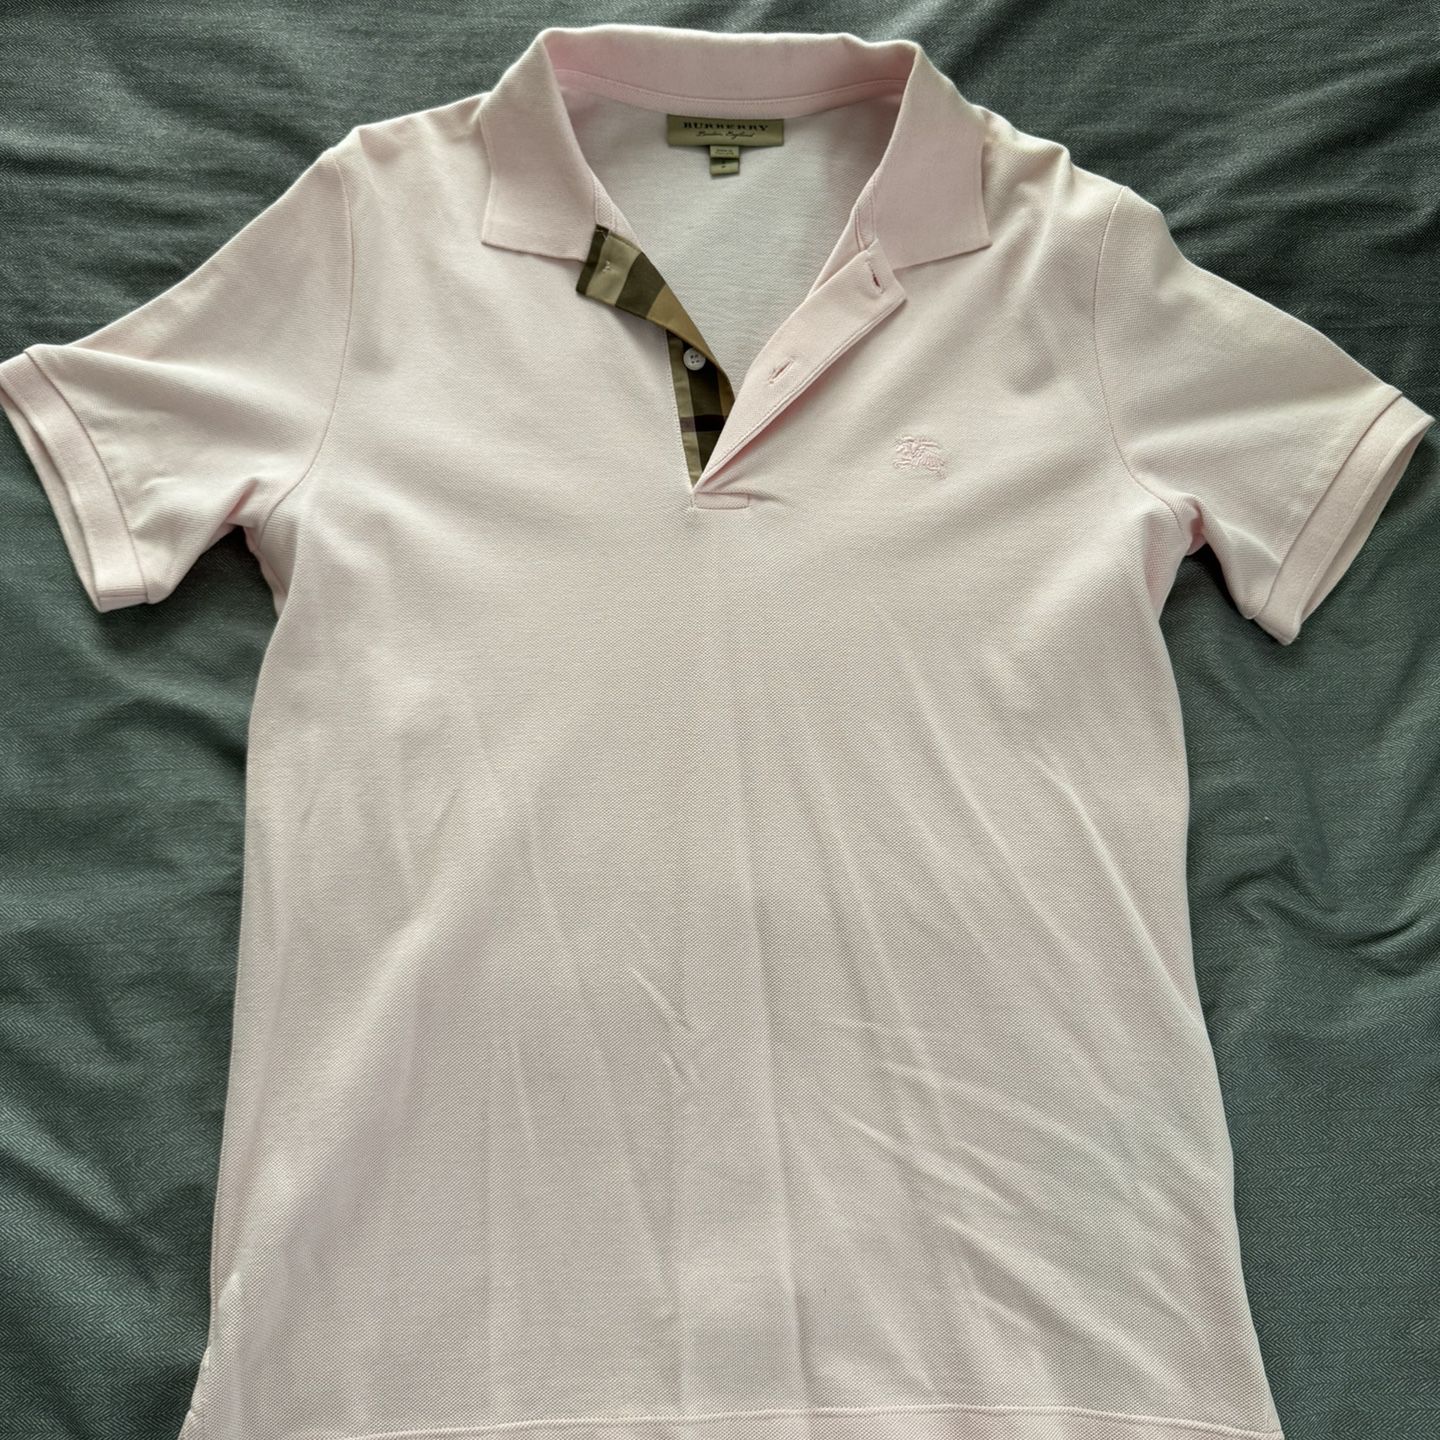 2 Burberry Polo T- Shirts Size Small Both For 80